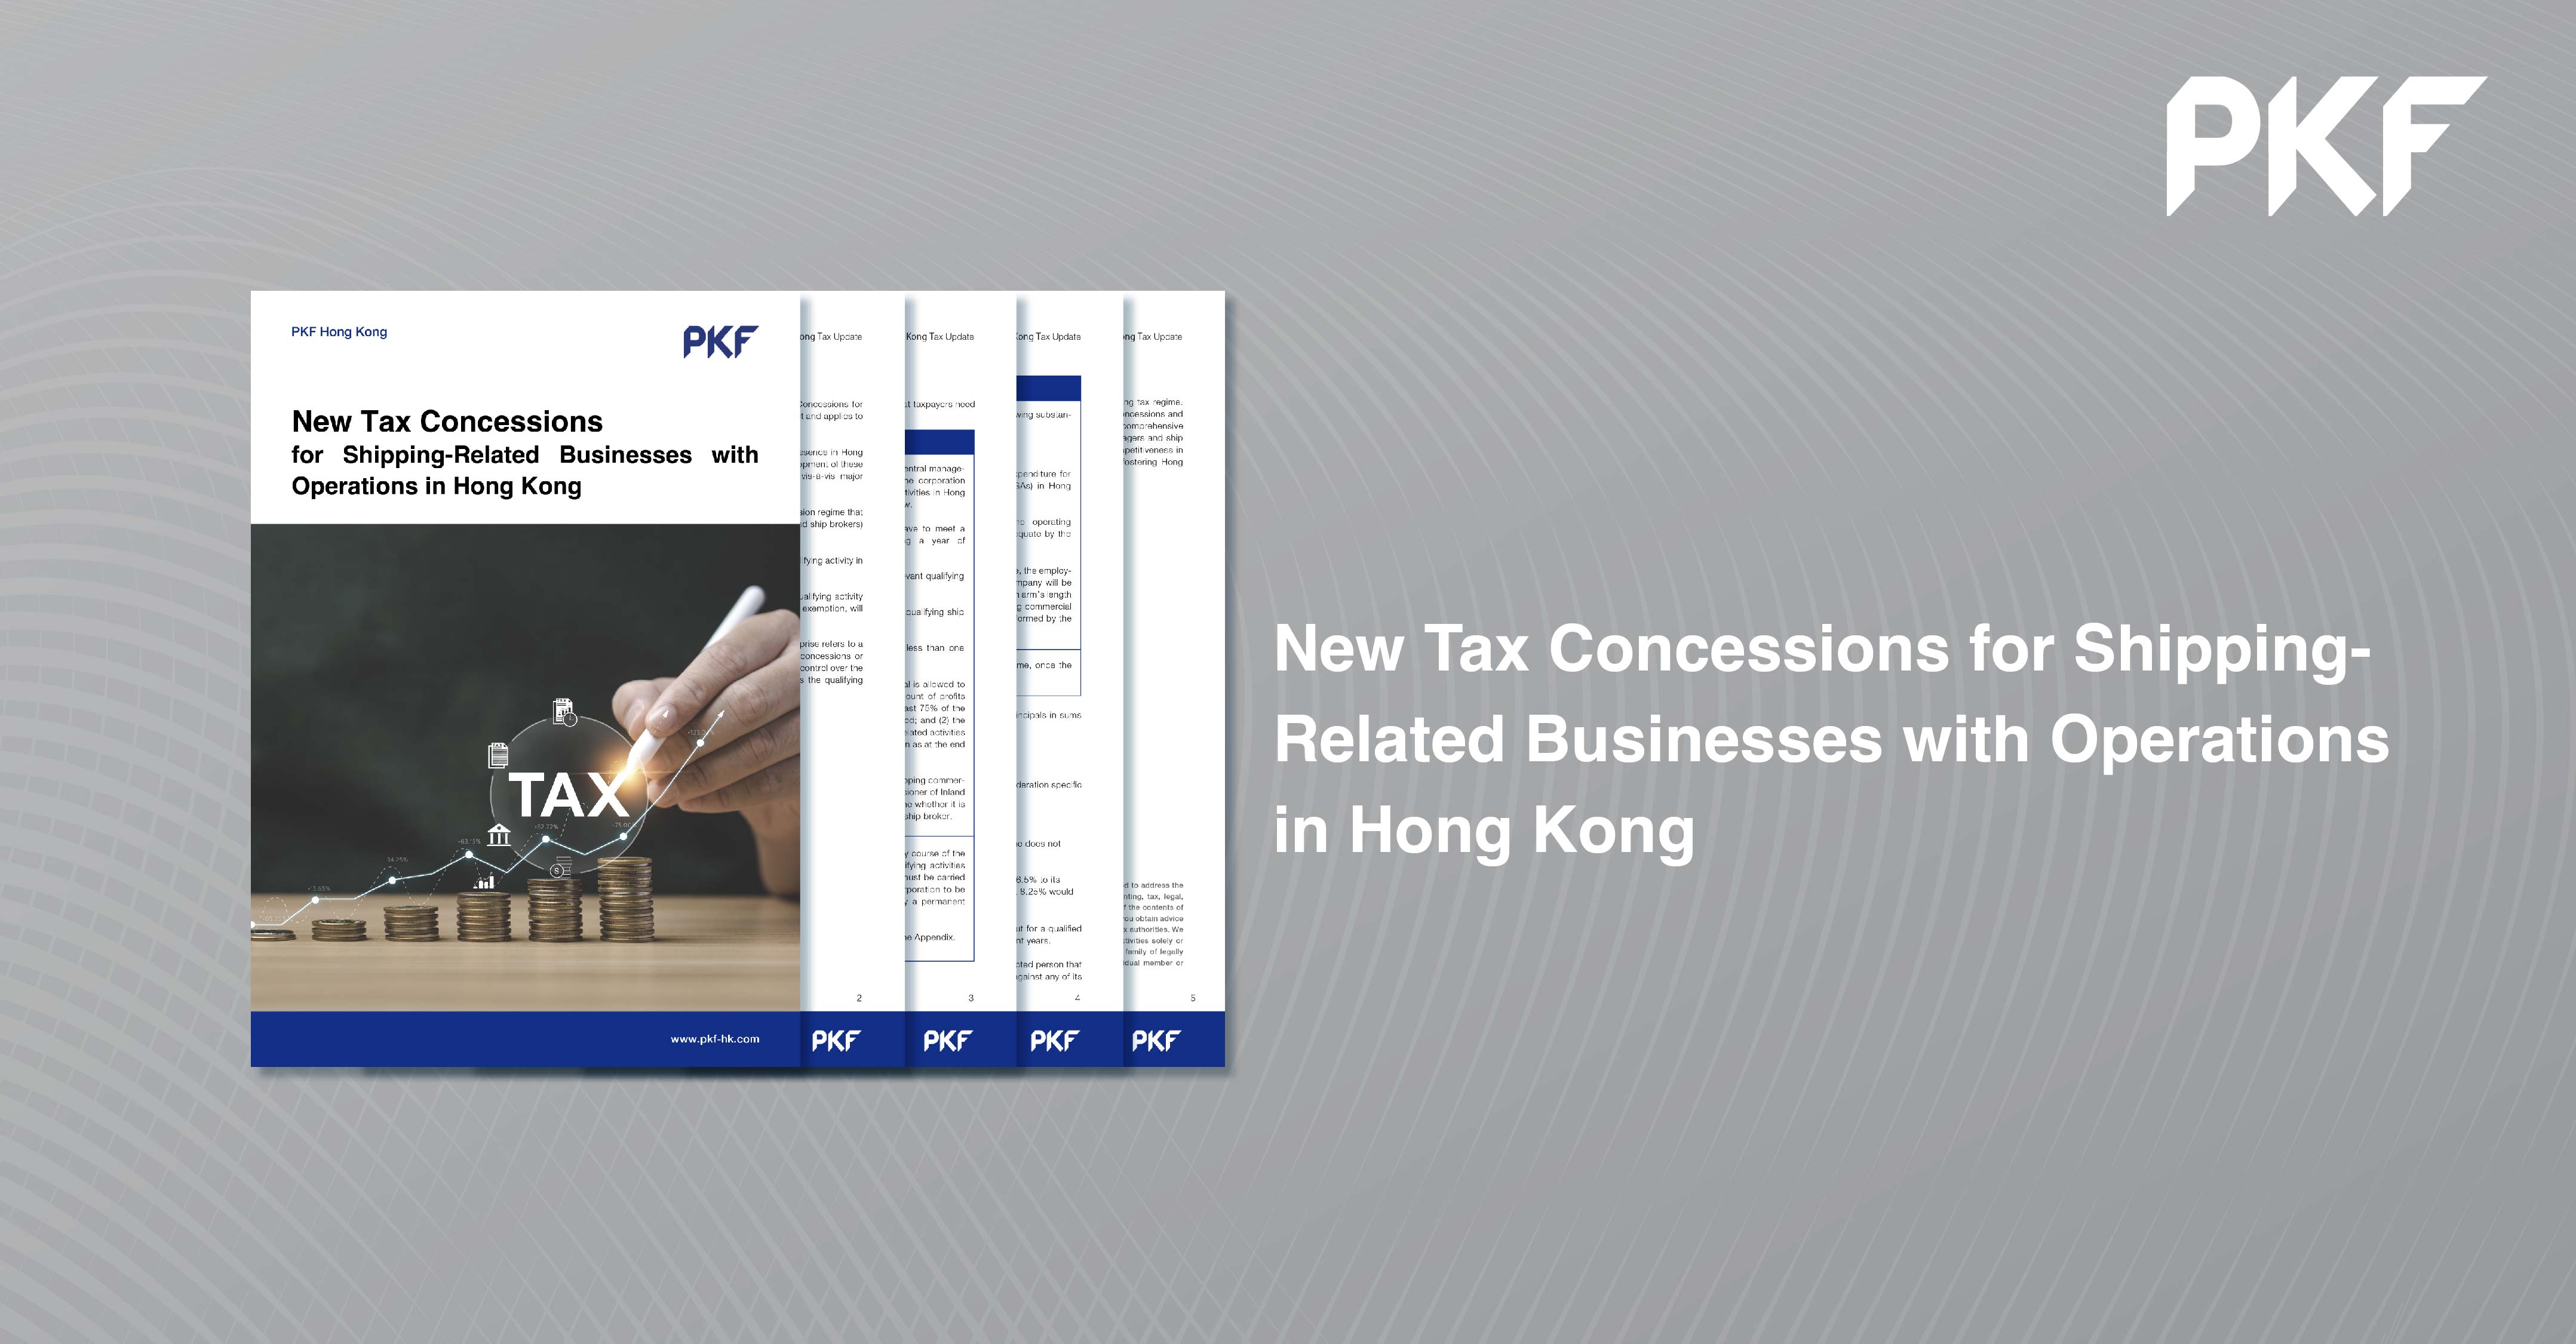 New Tax Concessions for Shipping-Related Businesses with Operations in HK